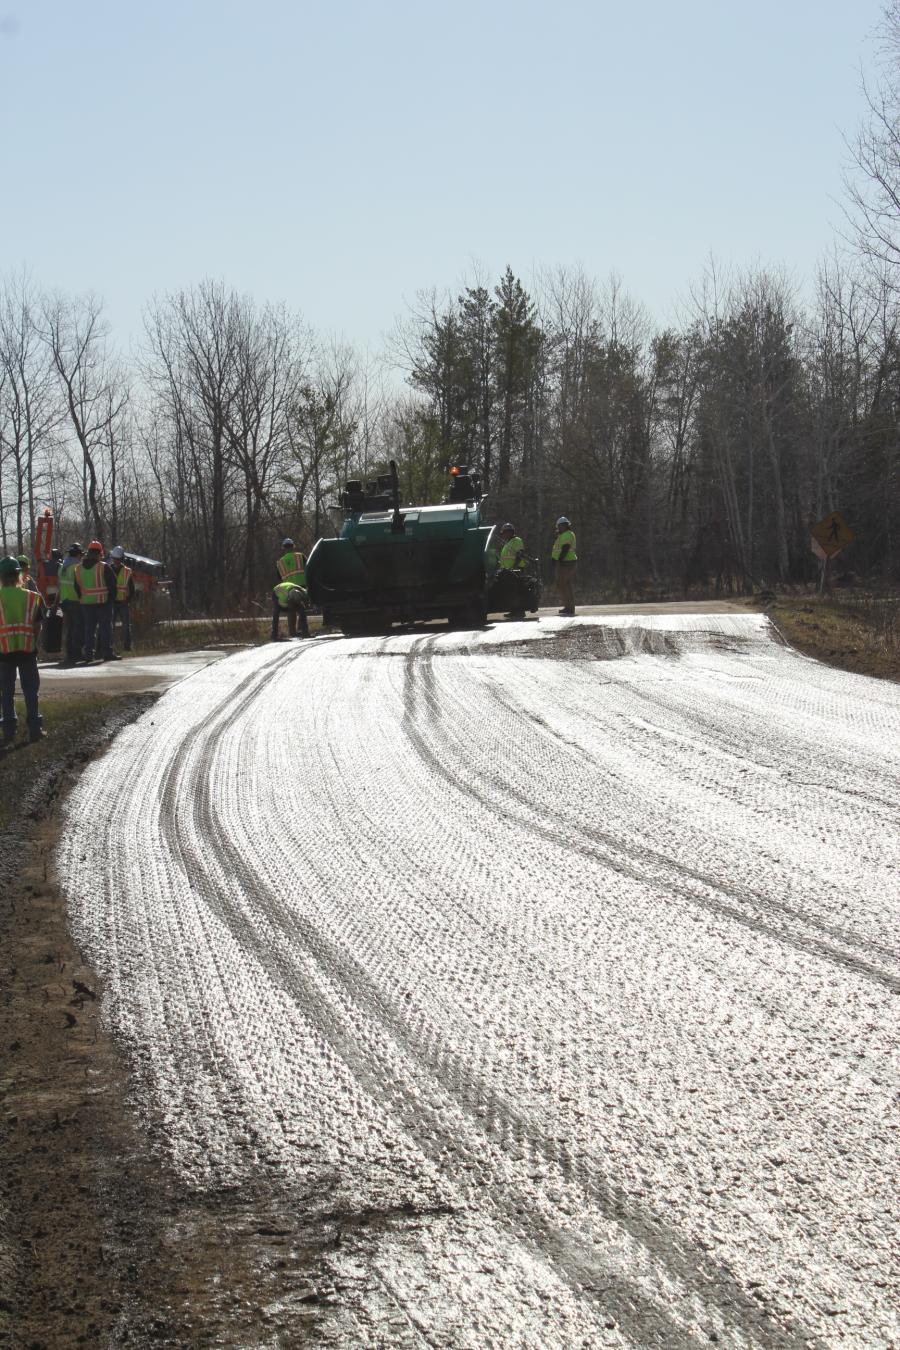 Lining up the paver for the first load.
(CEG photo)